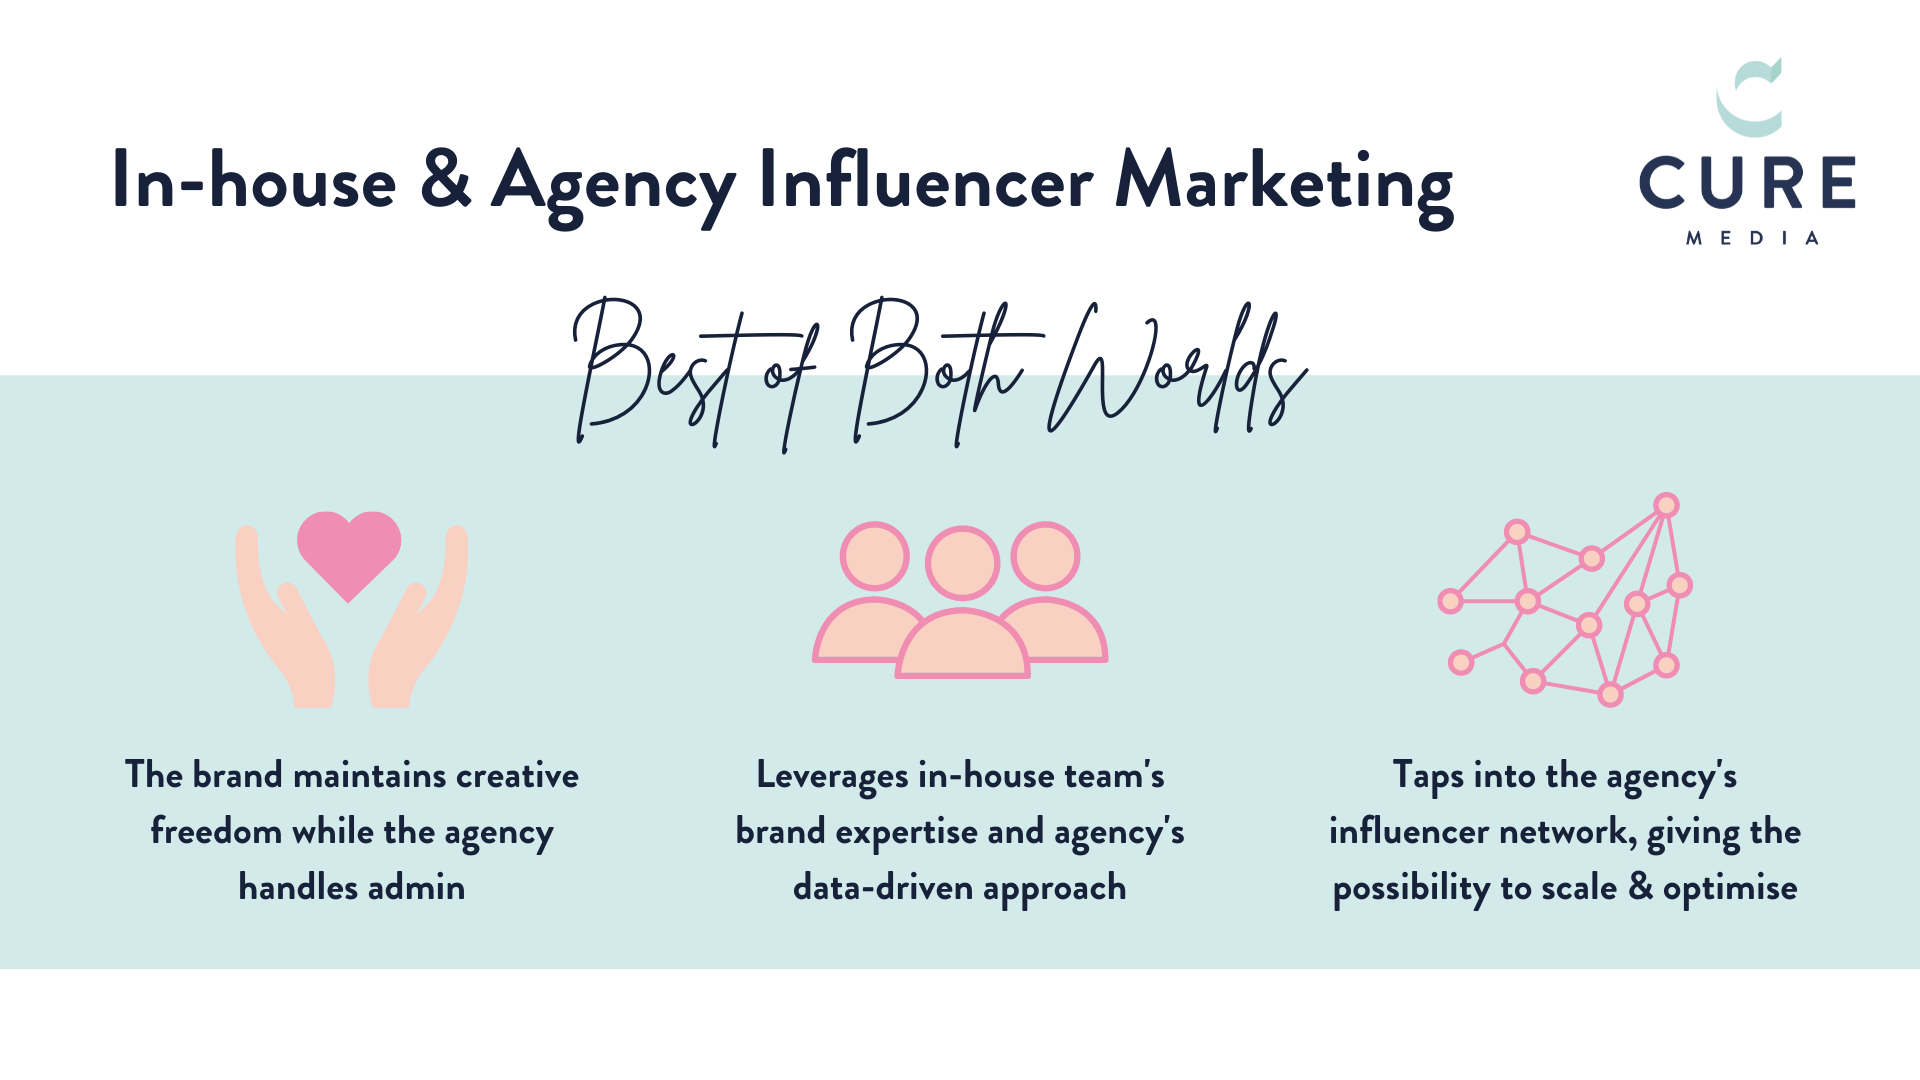 Using a mix of in-house and influencer marketing agency